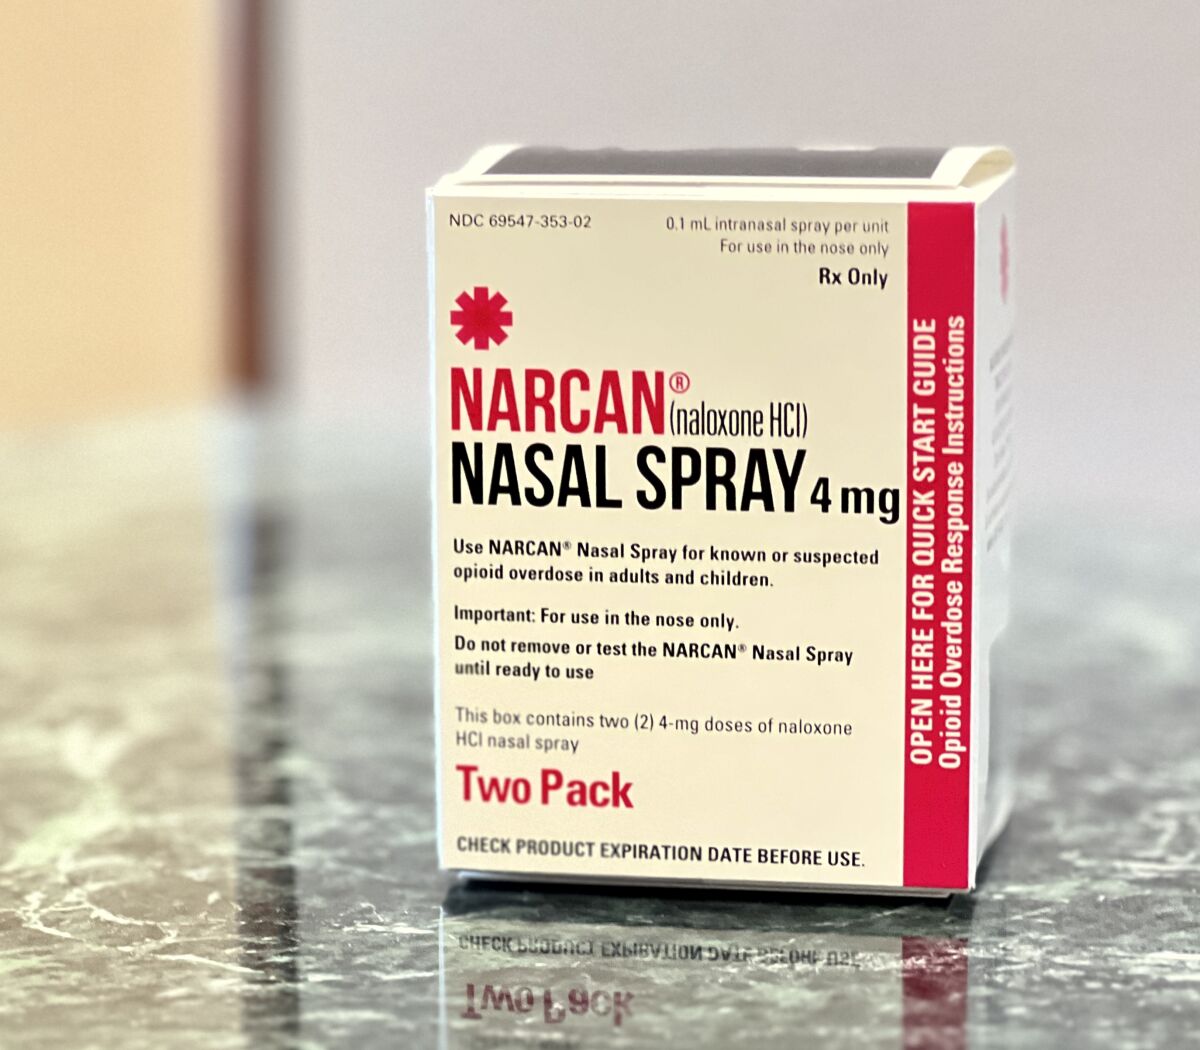 Narcan nasal spray is widely available now to treat fentanyl overdoses, 